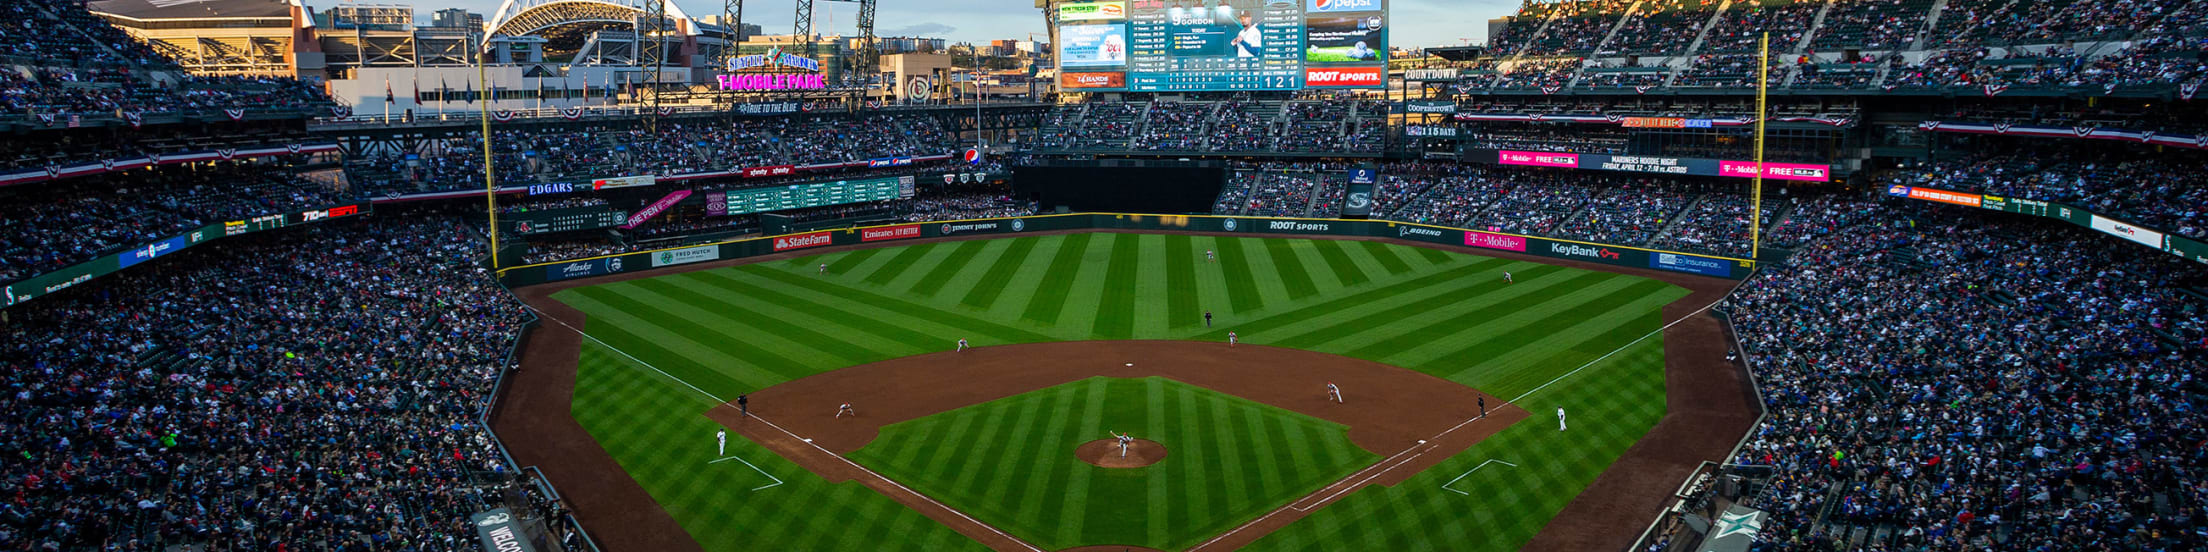 Seattle Mariners - Alaska Airlines is helping us count down the